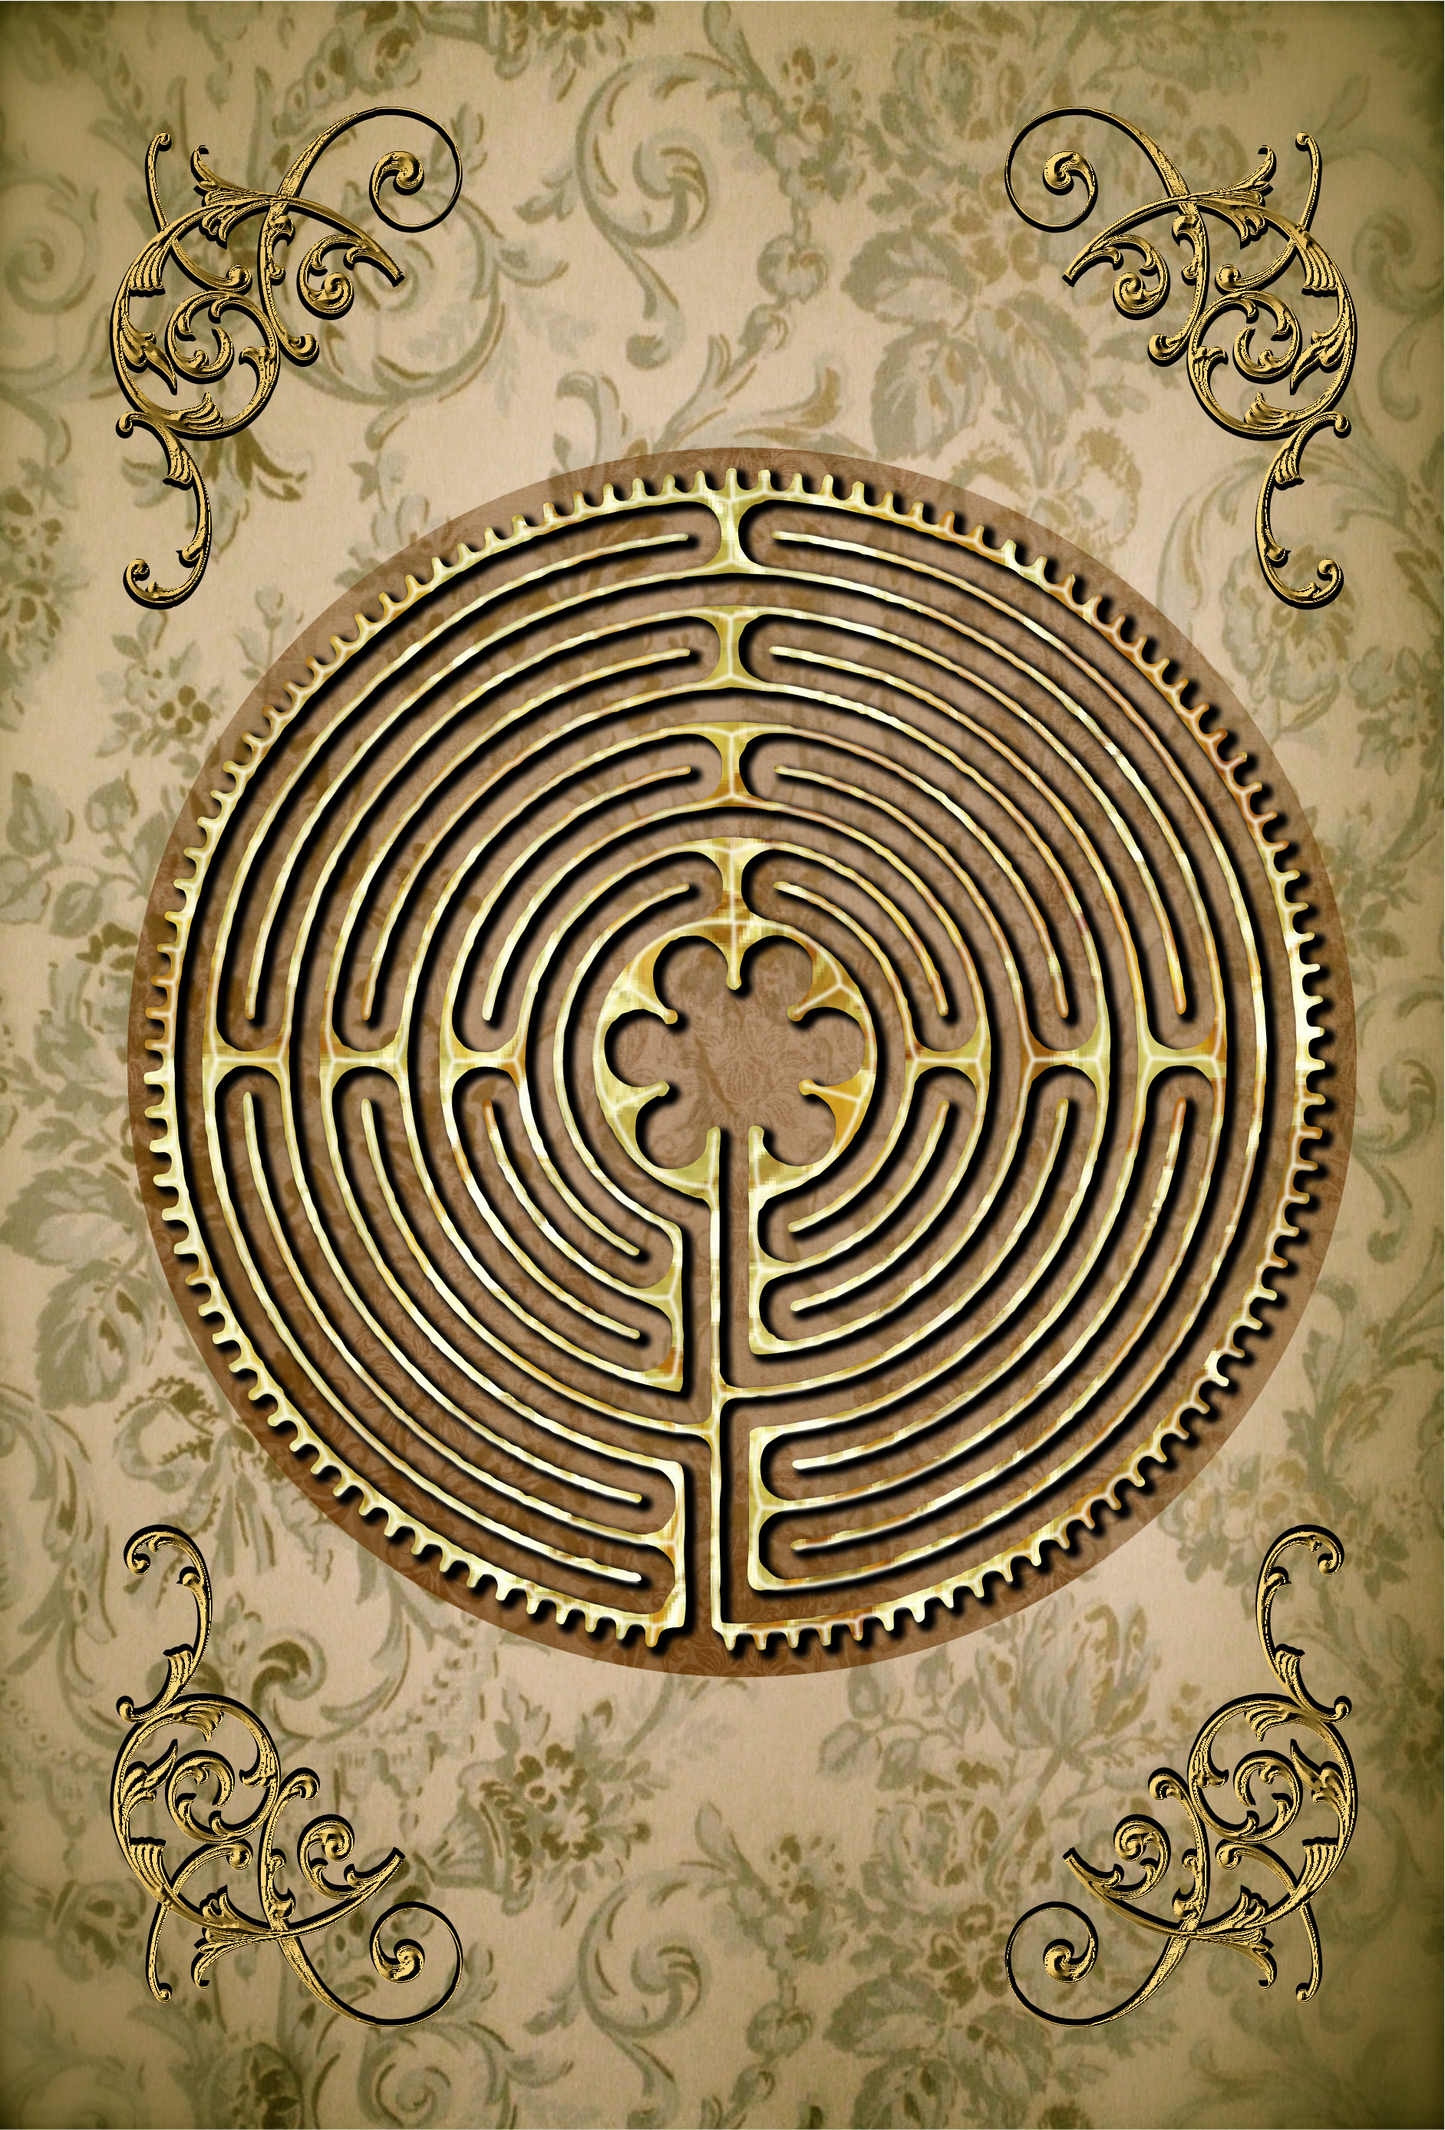 Finger Labyrinth Journals on Amazon